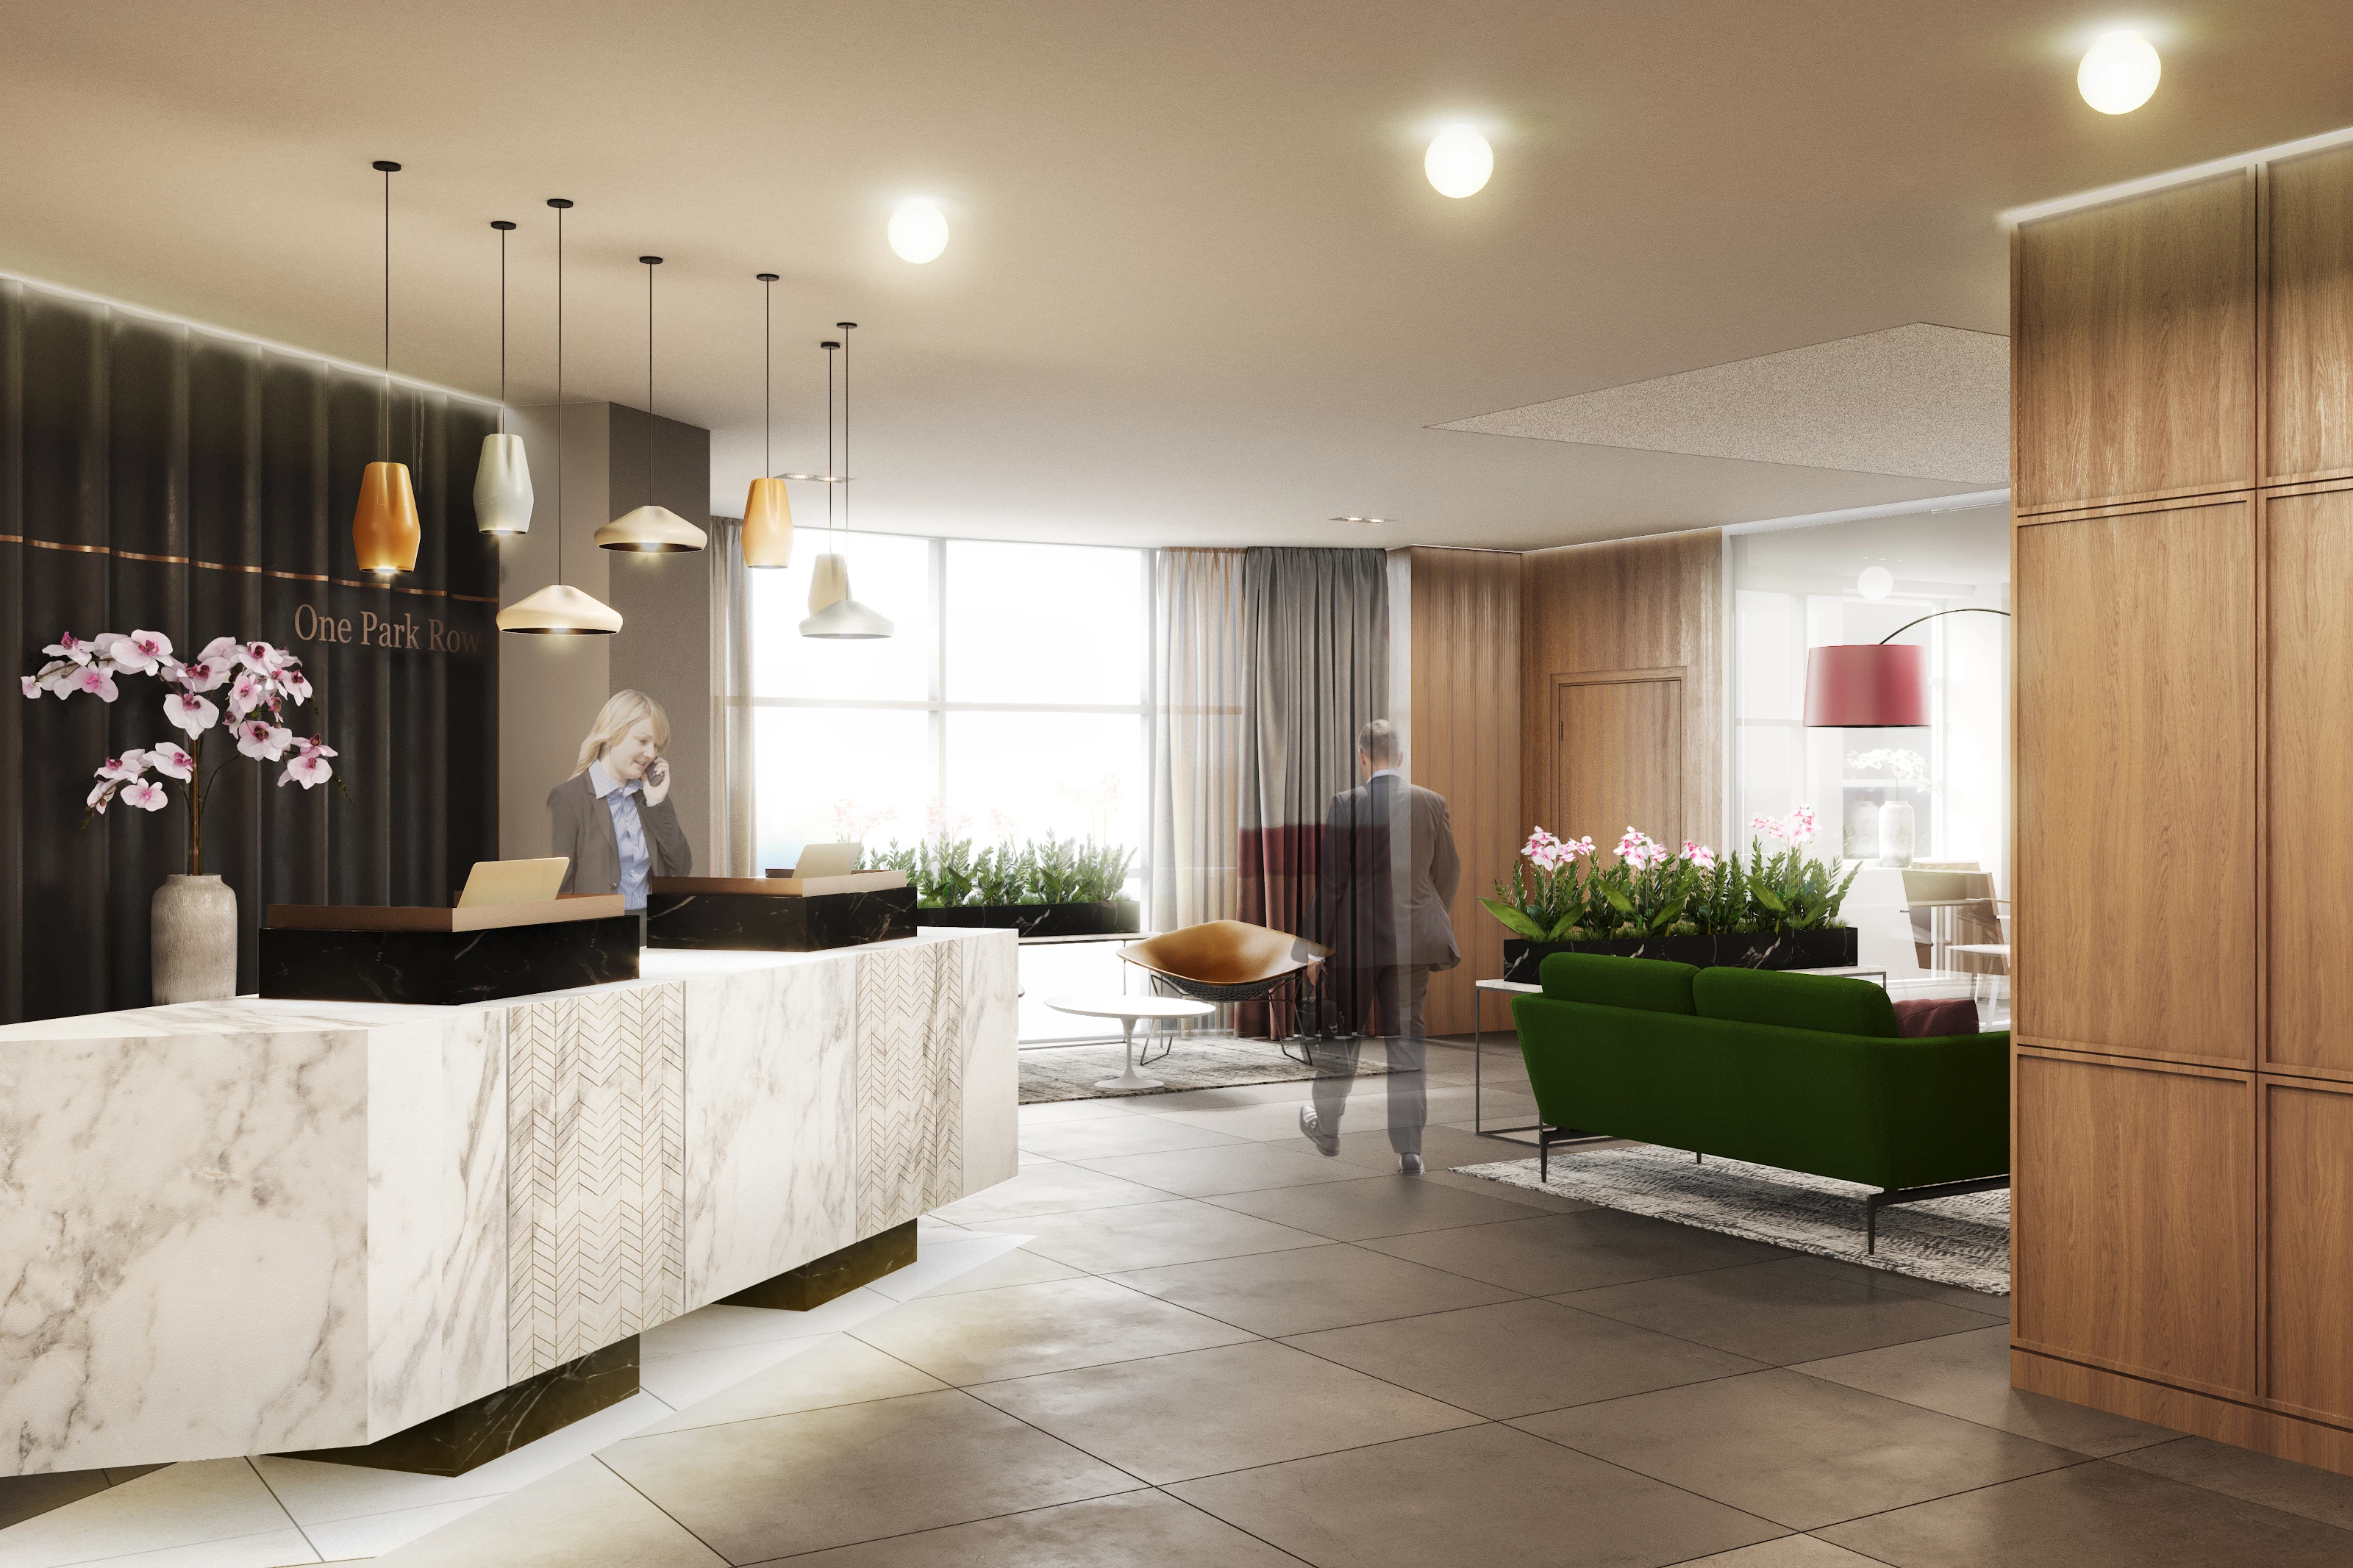 Gilbanks is completing a multi-million pound refurbishment over two floors